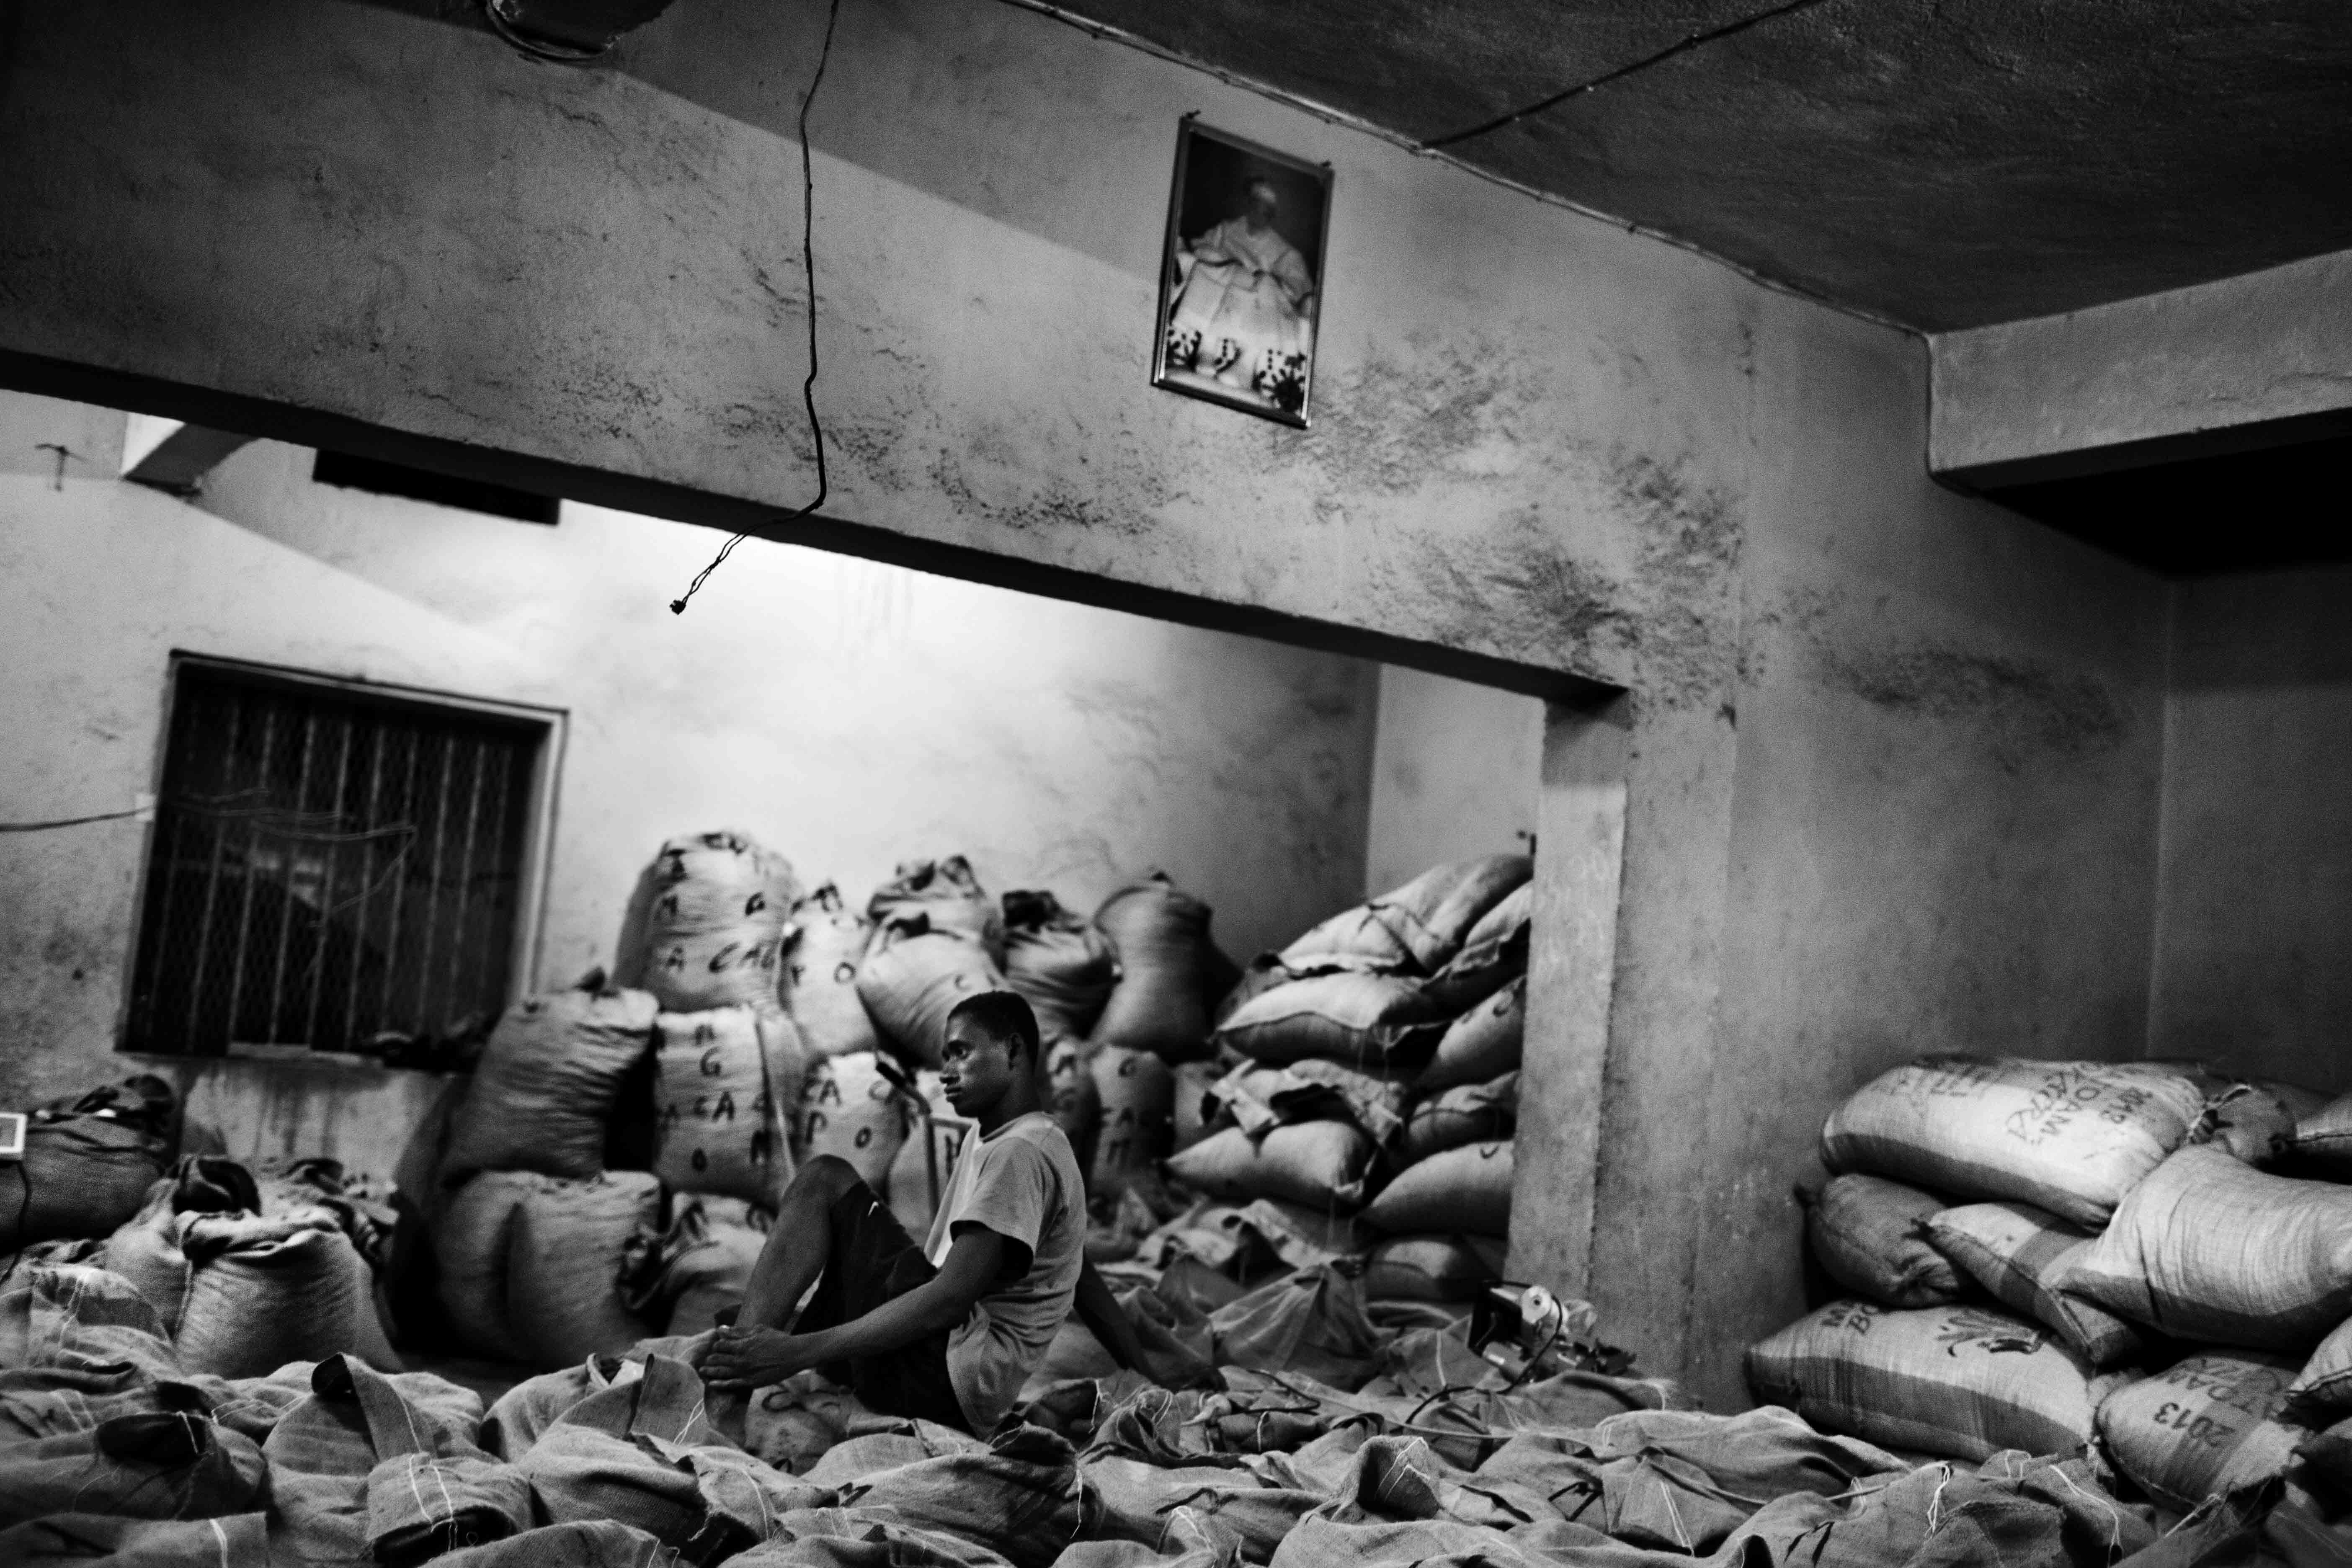 A man named Hashis sits on top of a new shipment of cocoa beans from the farmers who work for him. Aug, 7, 2013.